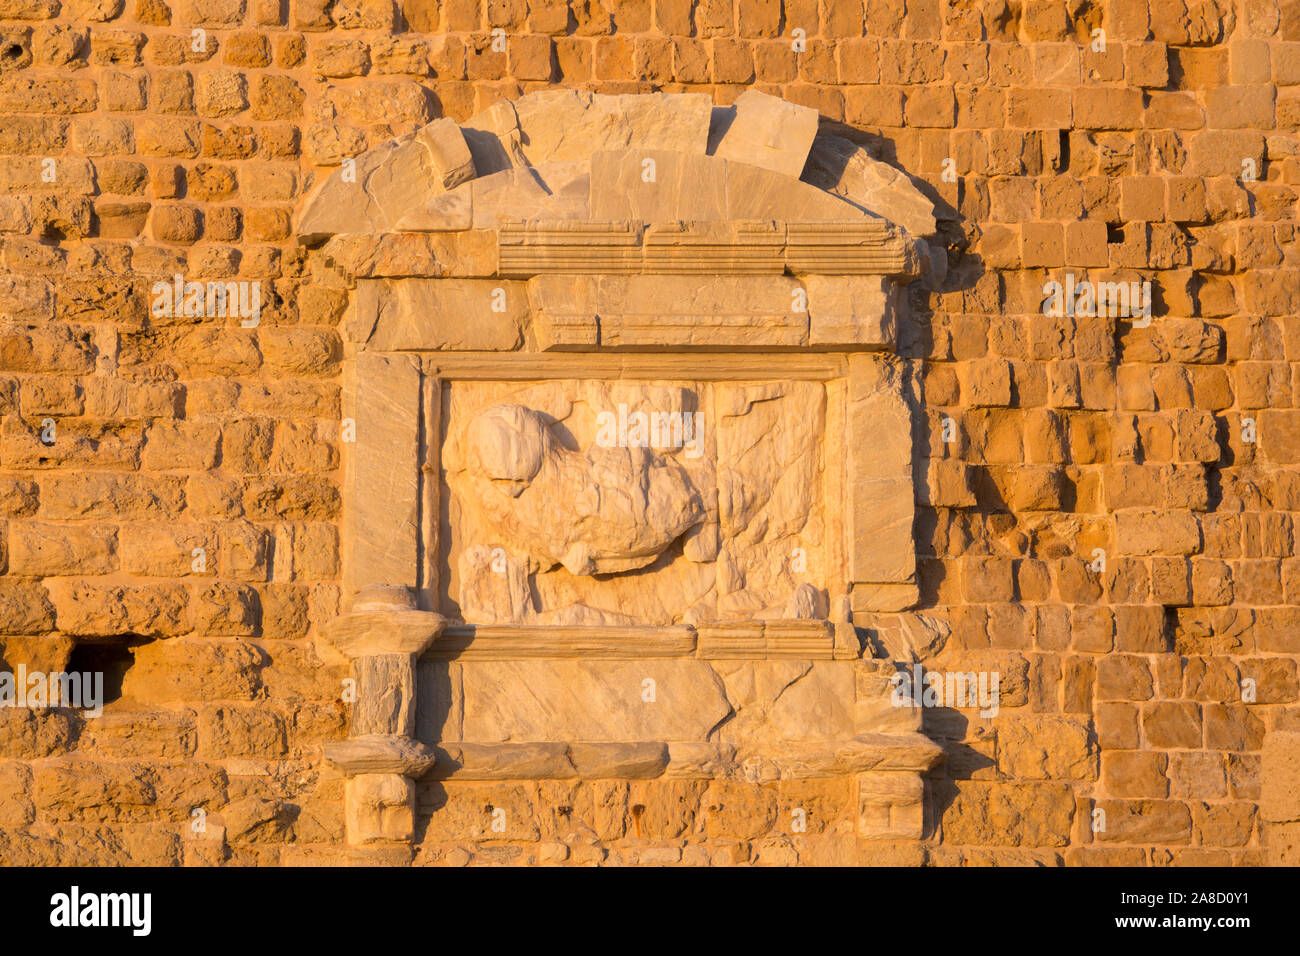 Heraklion, Crete, Greece. Badly eroded marble relief of the lion of St Mark on wall of the Koules Fortress, sunset. Stock Photo